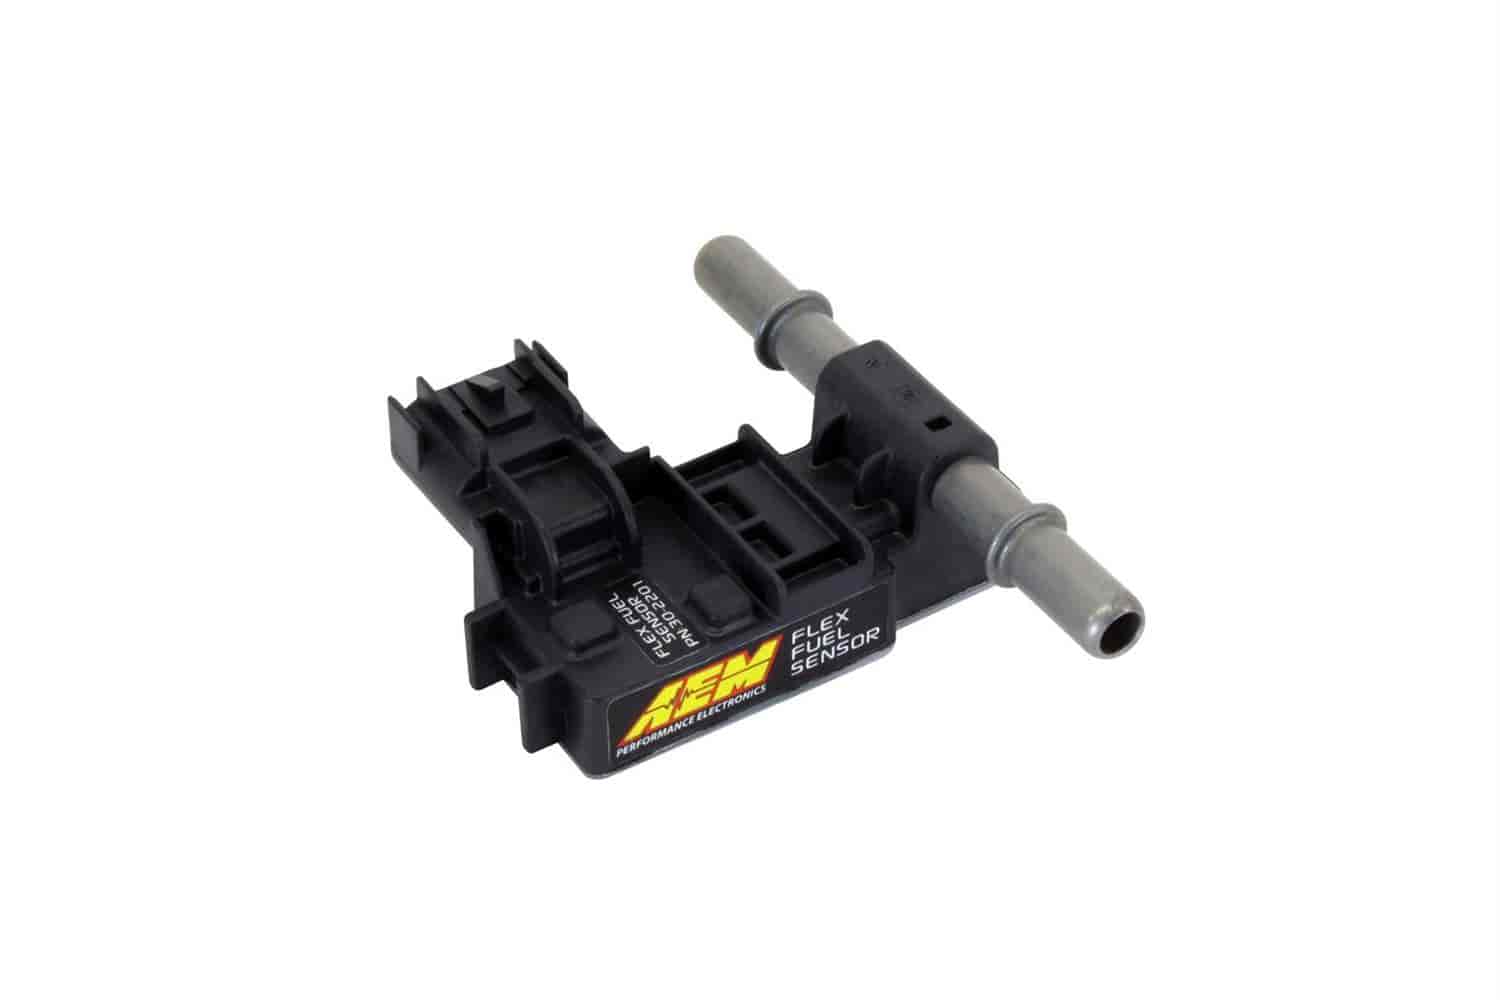 Flex Fuel Ethanol Content Sensor Kit Includes: -6 AN To 3/8" Adapter Fittings